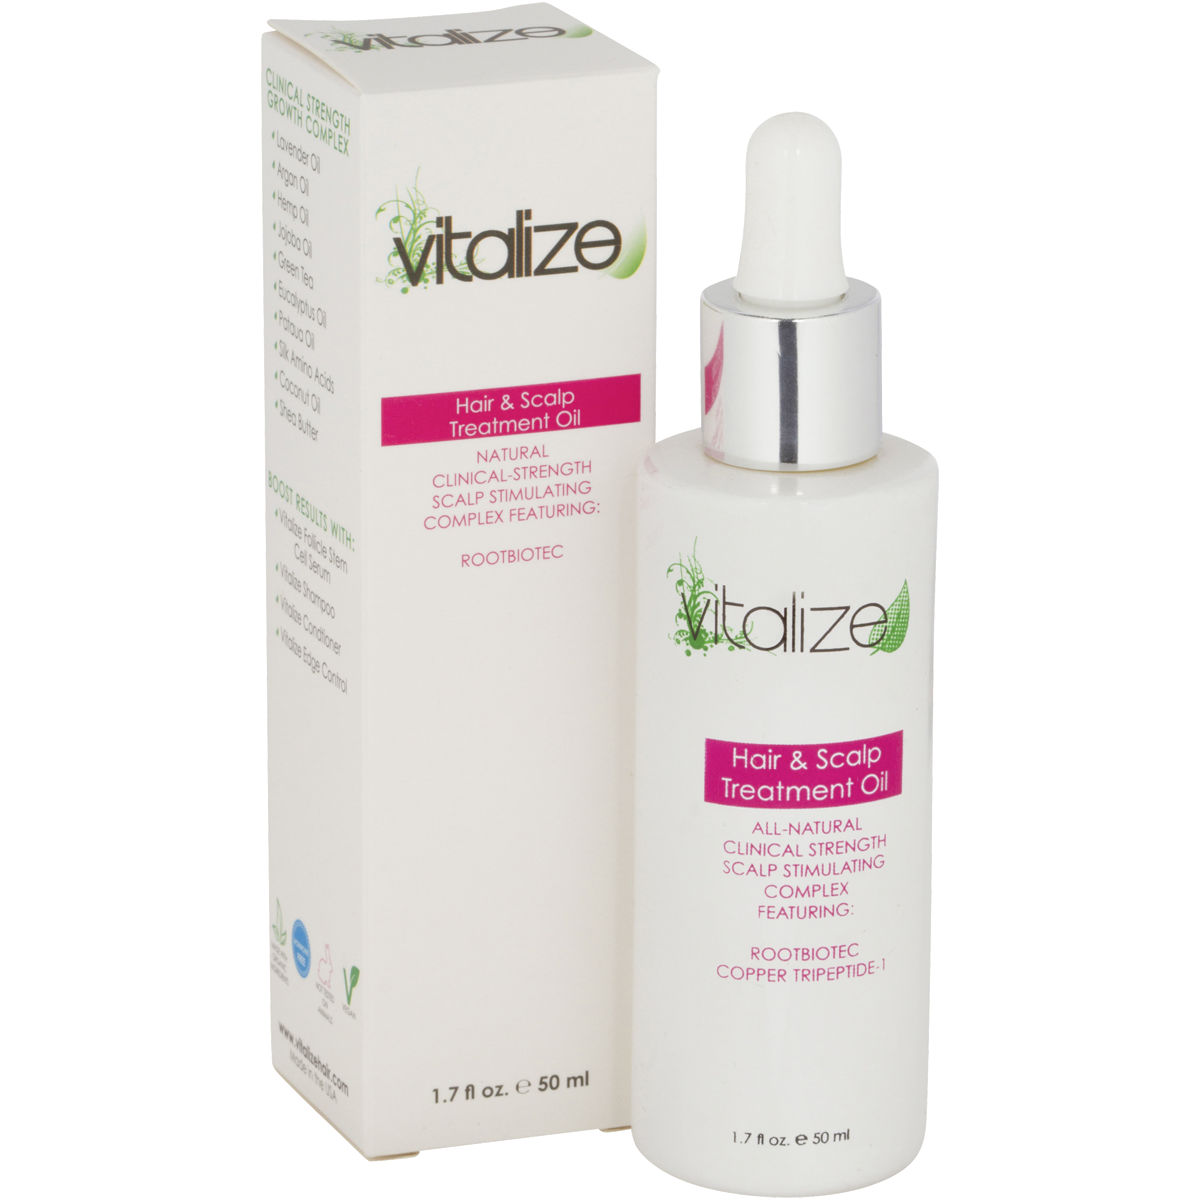 New Product: 'Vitalize Hair' Increase Hair Growth, Reduce Hair Loss,  Thinning Edges - Talking With Tami